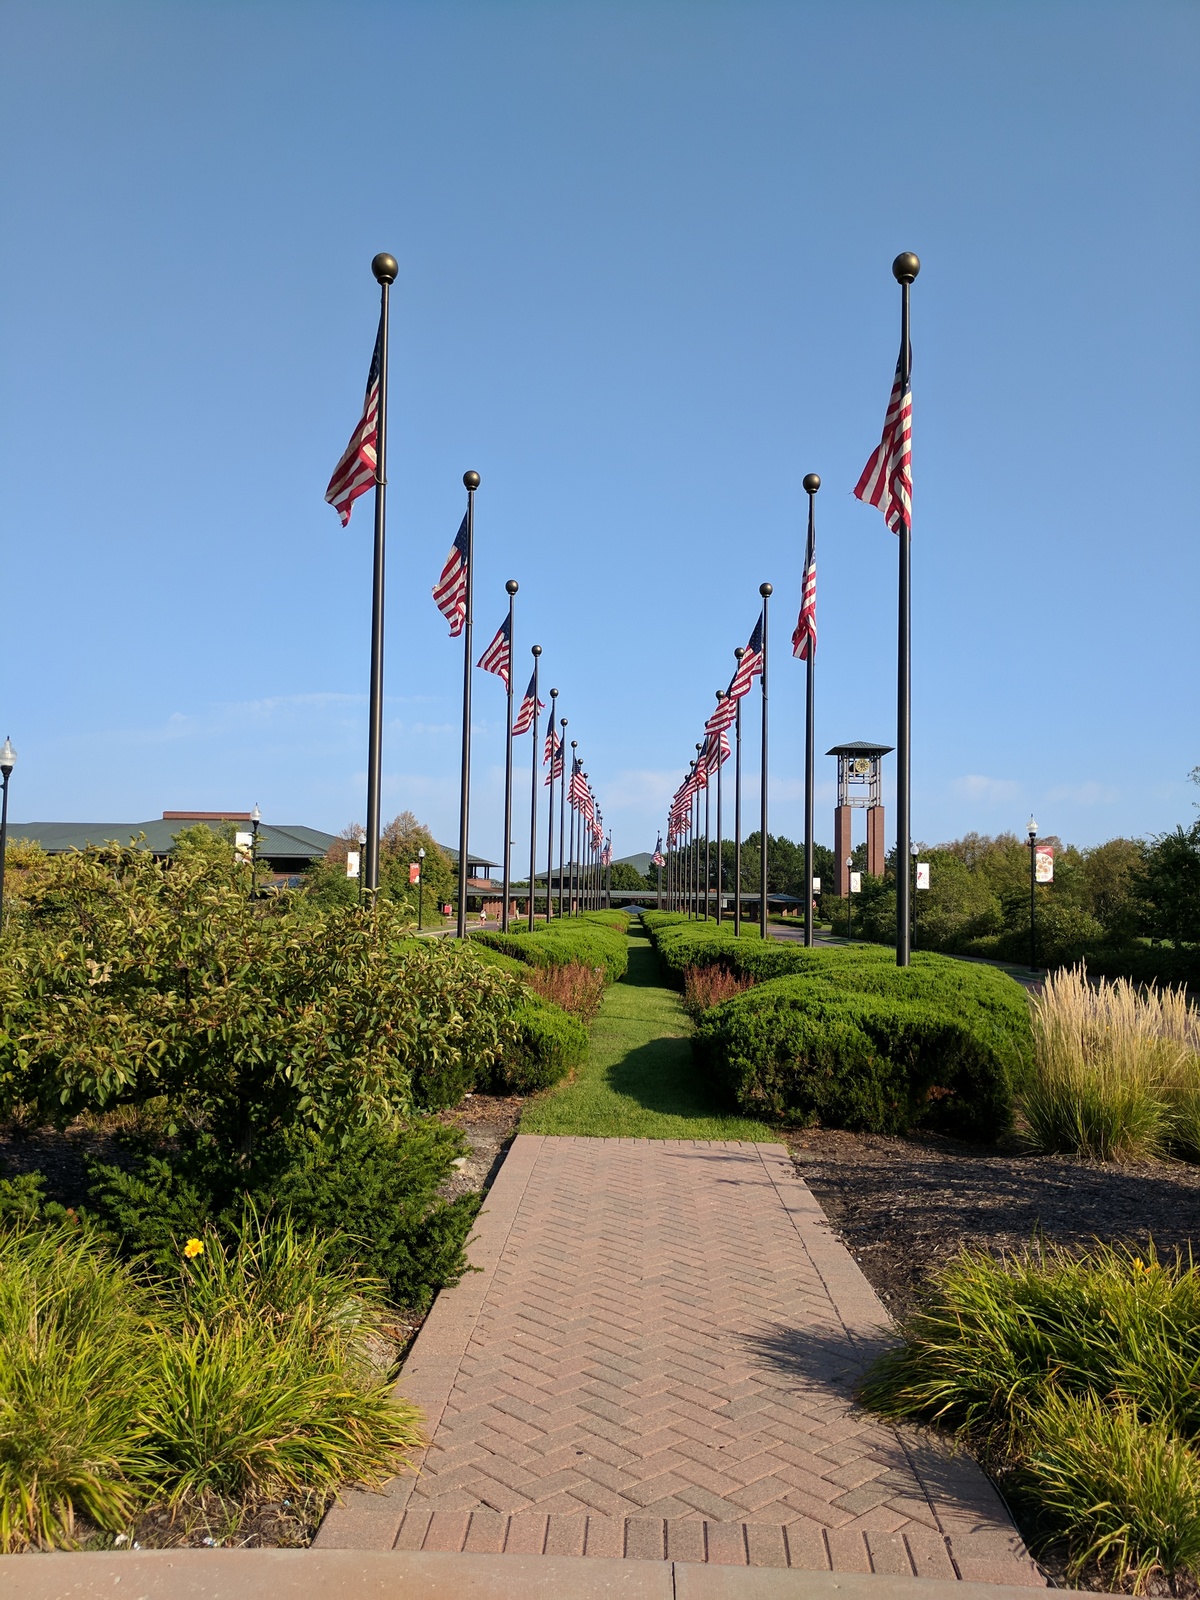 Many American flags in two rows in a garden